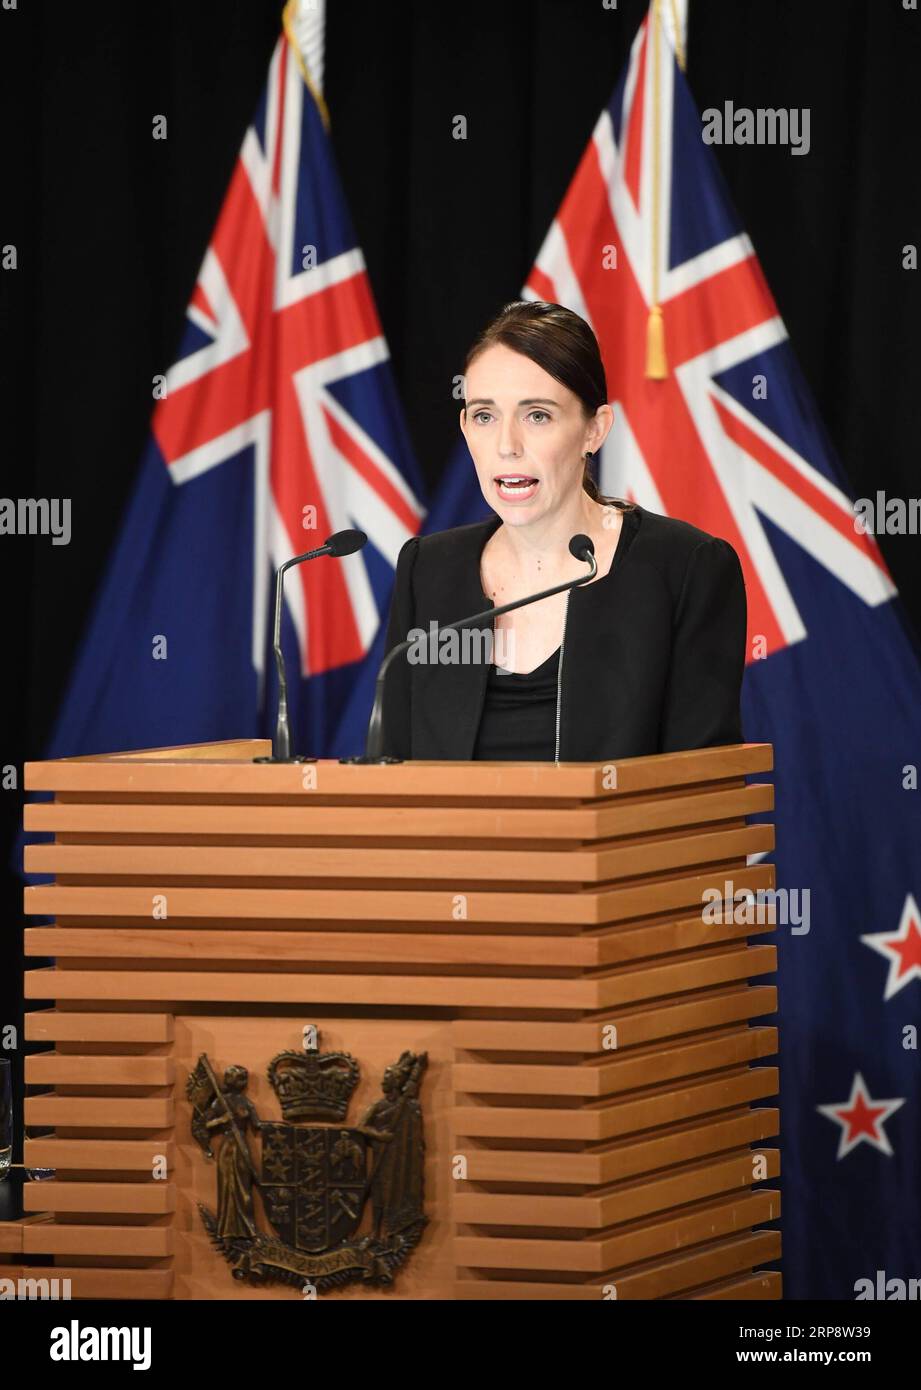 (190316) -- WELLINGTON, March 16, 2019 (Xinhua) -- New Zealand Prime Minister Jacinda Ardern addresses a briefing in Wellington, capital of New Zealand, on March 16, 2019. Jacinda Ardern reiterated to the public on Saturday morning that the country s gun law will be changed. Gunmen opened fire in two separate mosques in Christchurch on Friday, killing 49 people and wounding 48 others. (Xinhua/Guo Lei) NEW ZEALAND-WELLINGTON-PM-CHRISTCHURCH-ATTACKS-BRIEFING PUBLICATIONxNOTxINxCHN Stock Photo